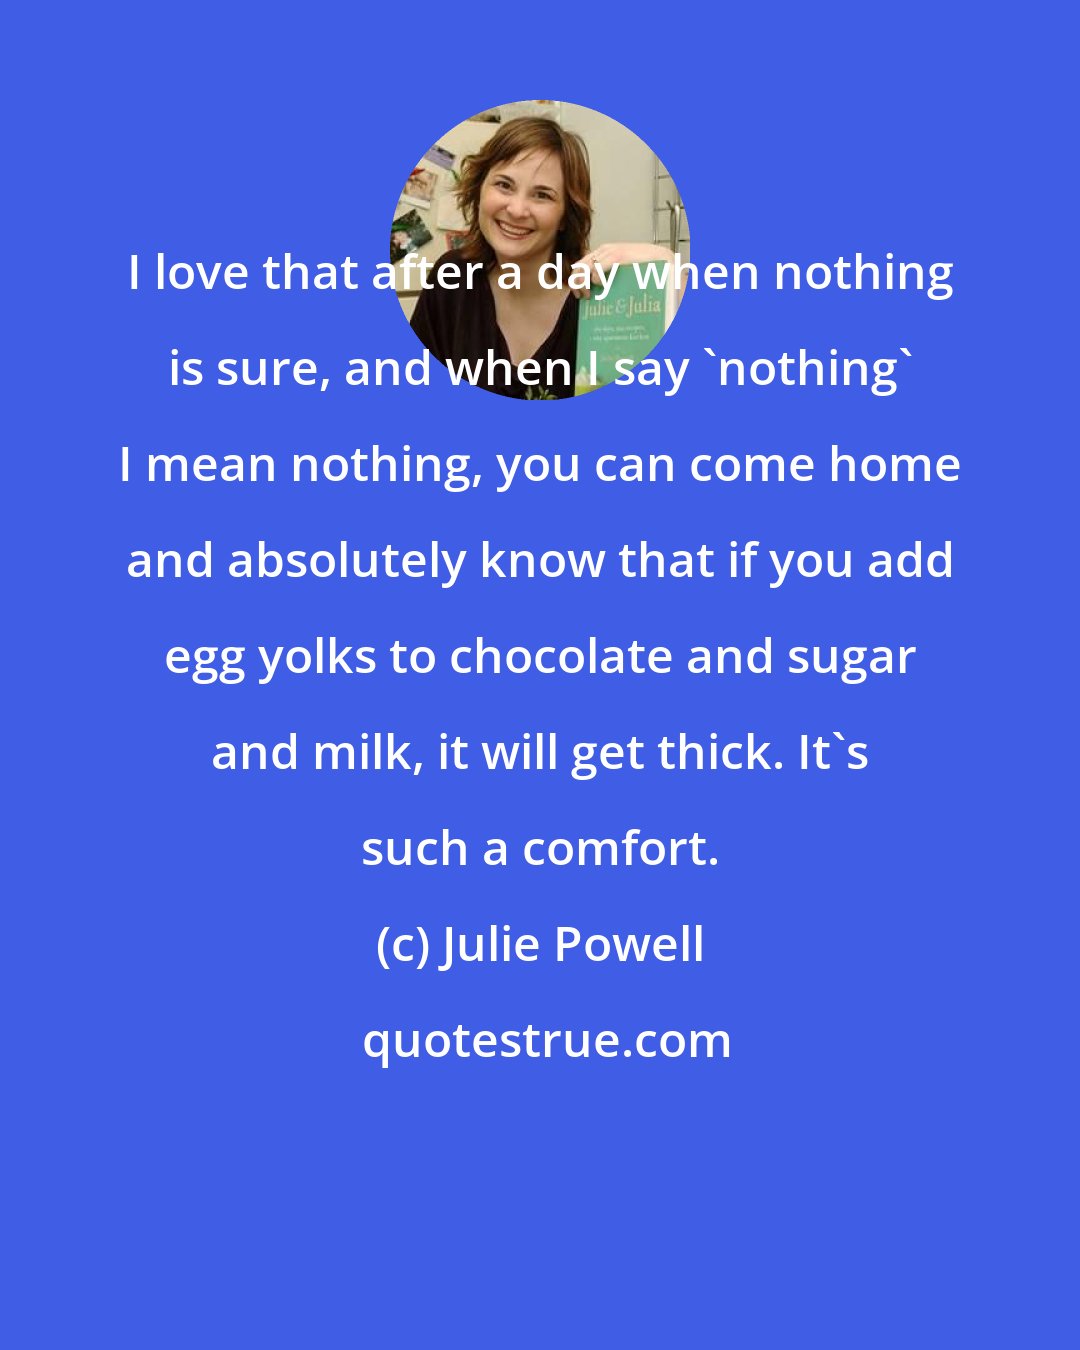 Julie Powell: I love that after a day when nothing is sure, and when I say 'nothing' I mean nothing, you can come home and absolutely know that if you add egg yolks to chocolate and sugar and milk, it will get thick. It's such a comfort.